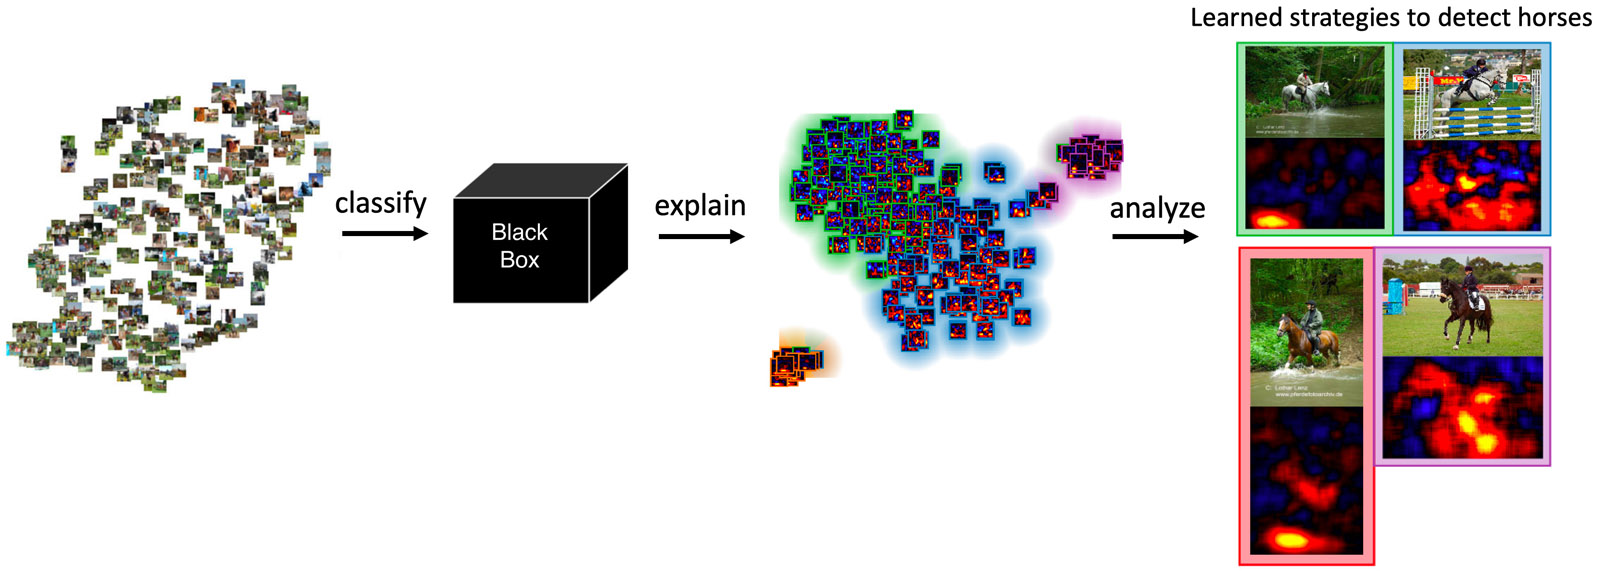 Layer-wise Relevance Propagation provides a look inside the “black box”.